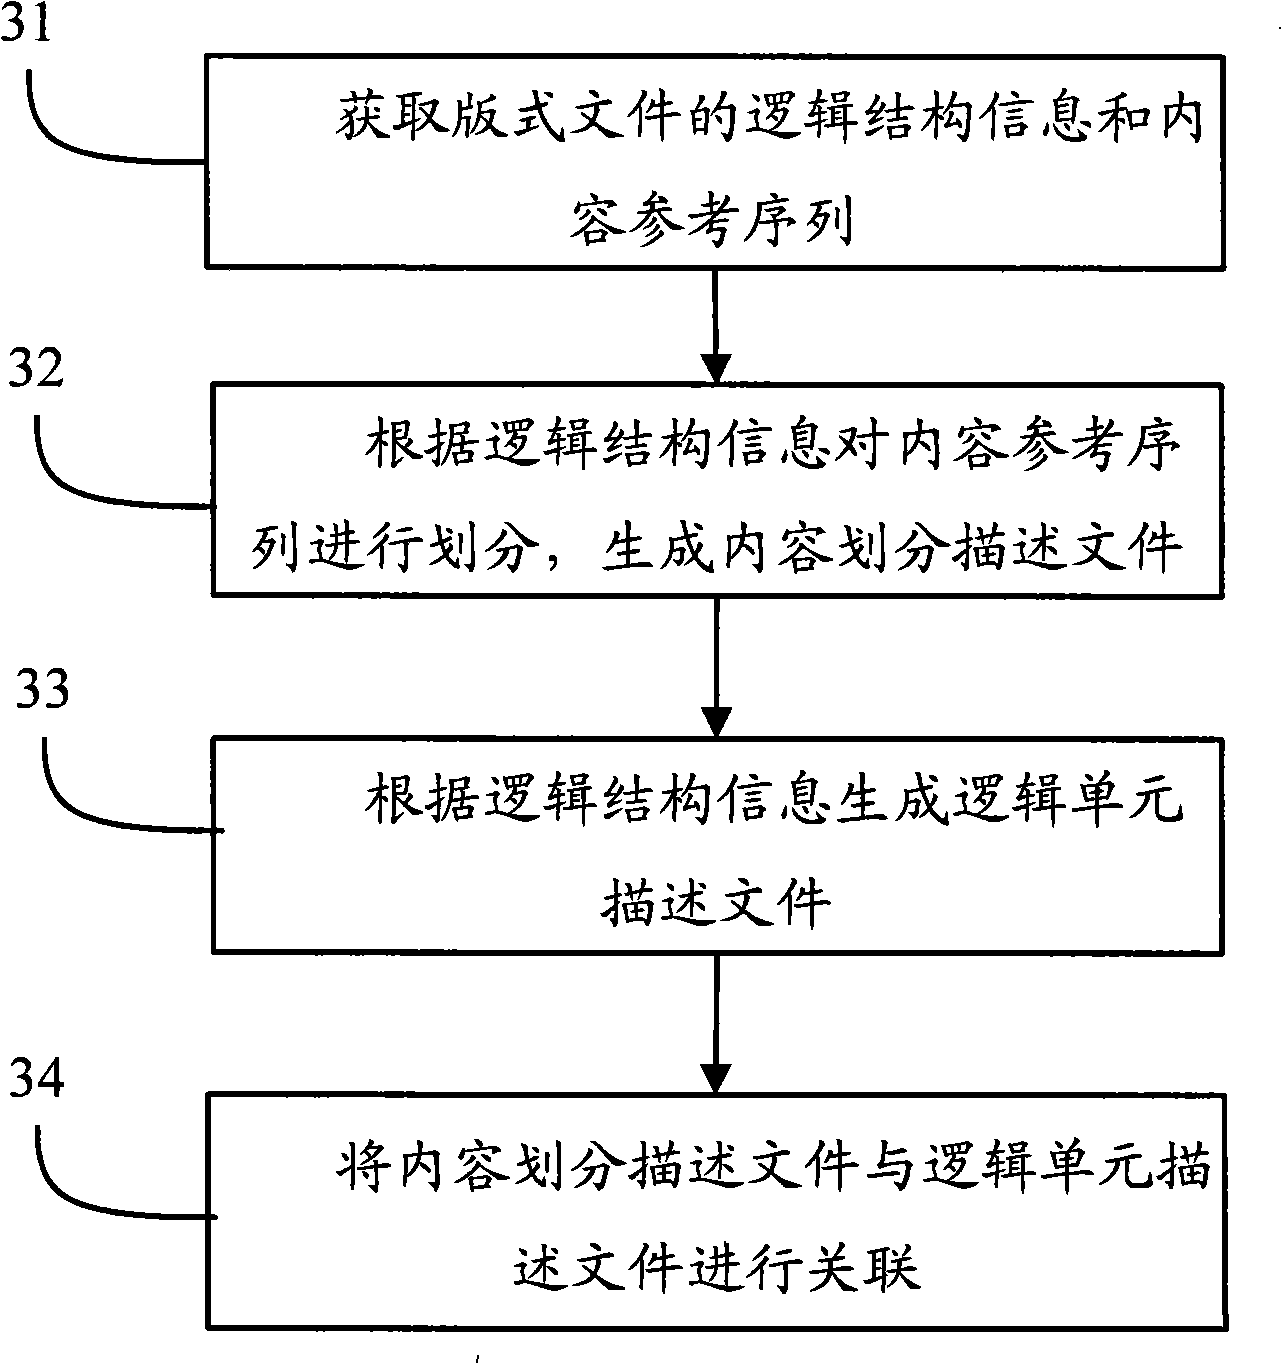 Representation method and system of layout file logical structure information